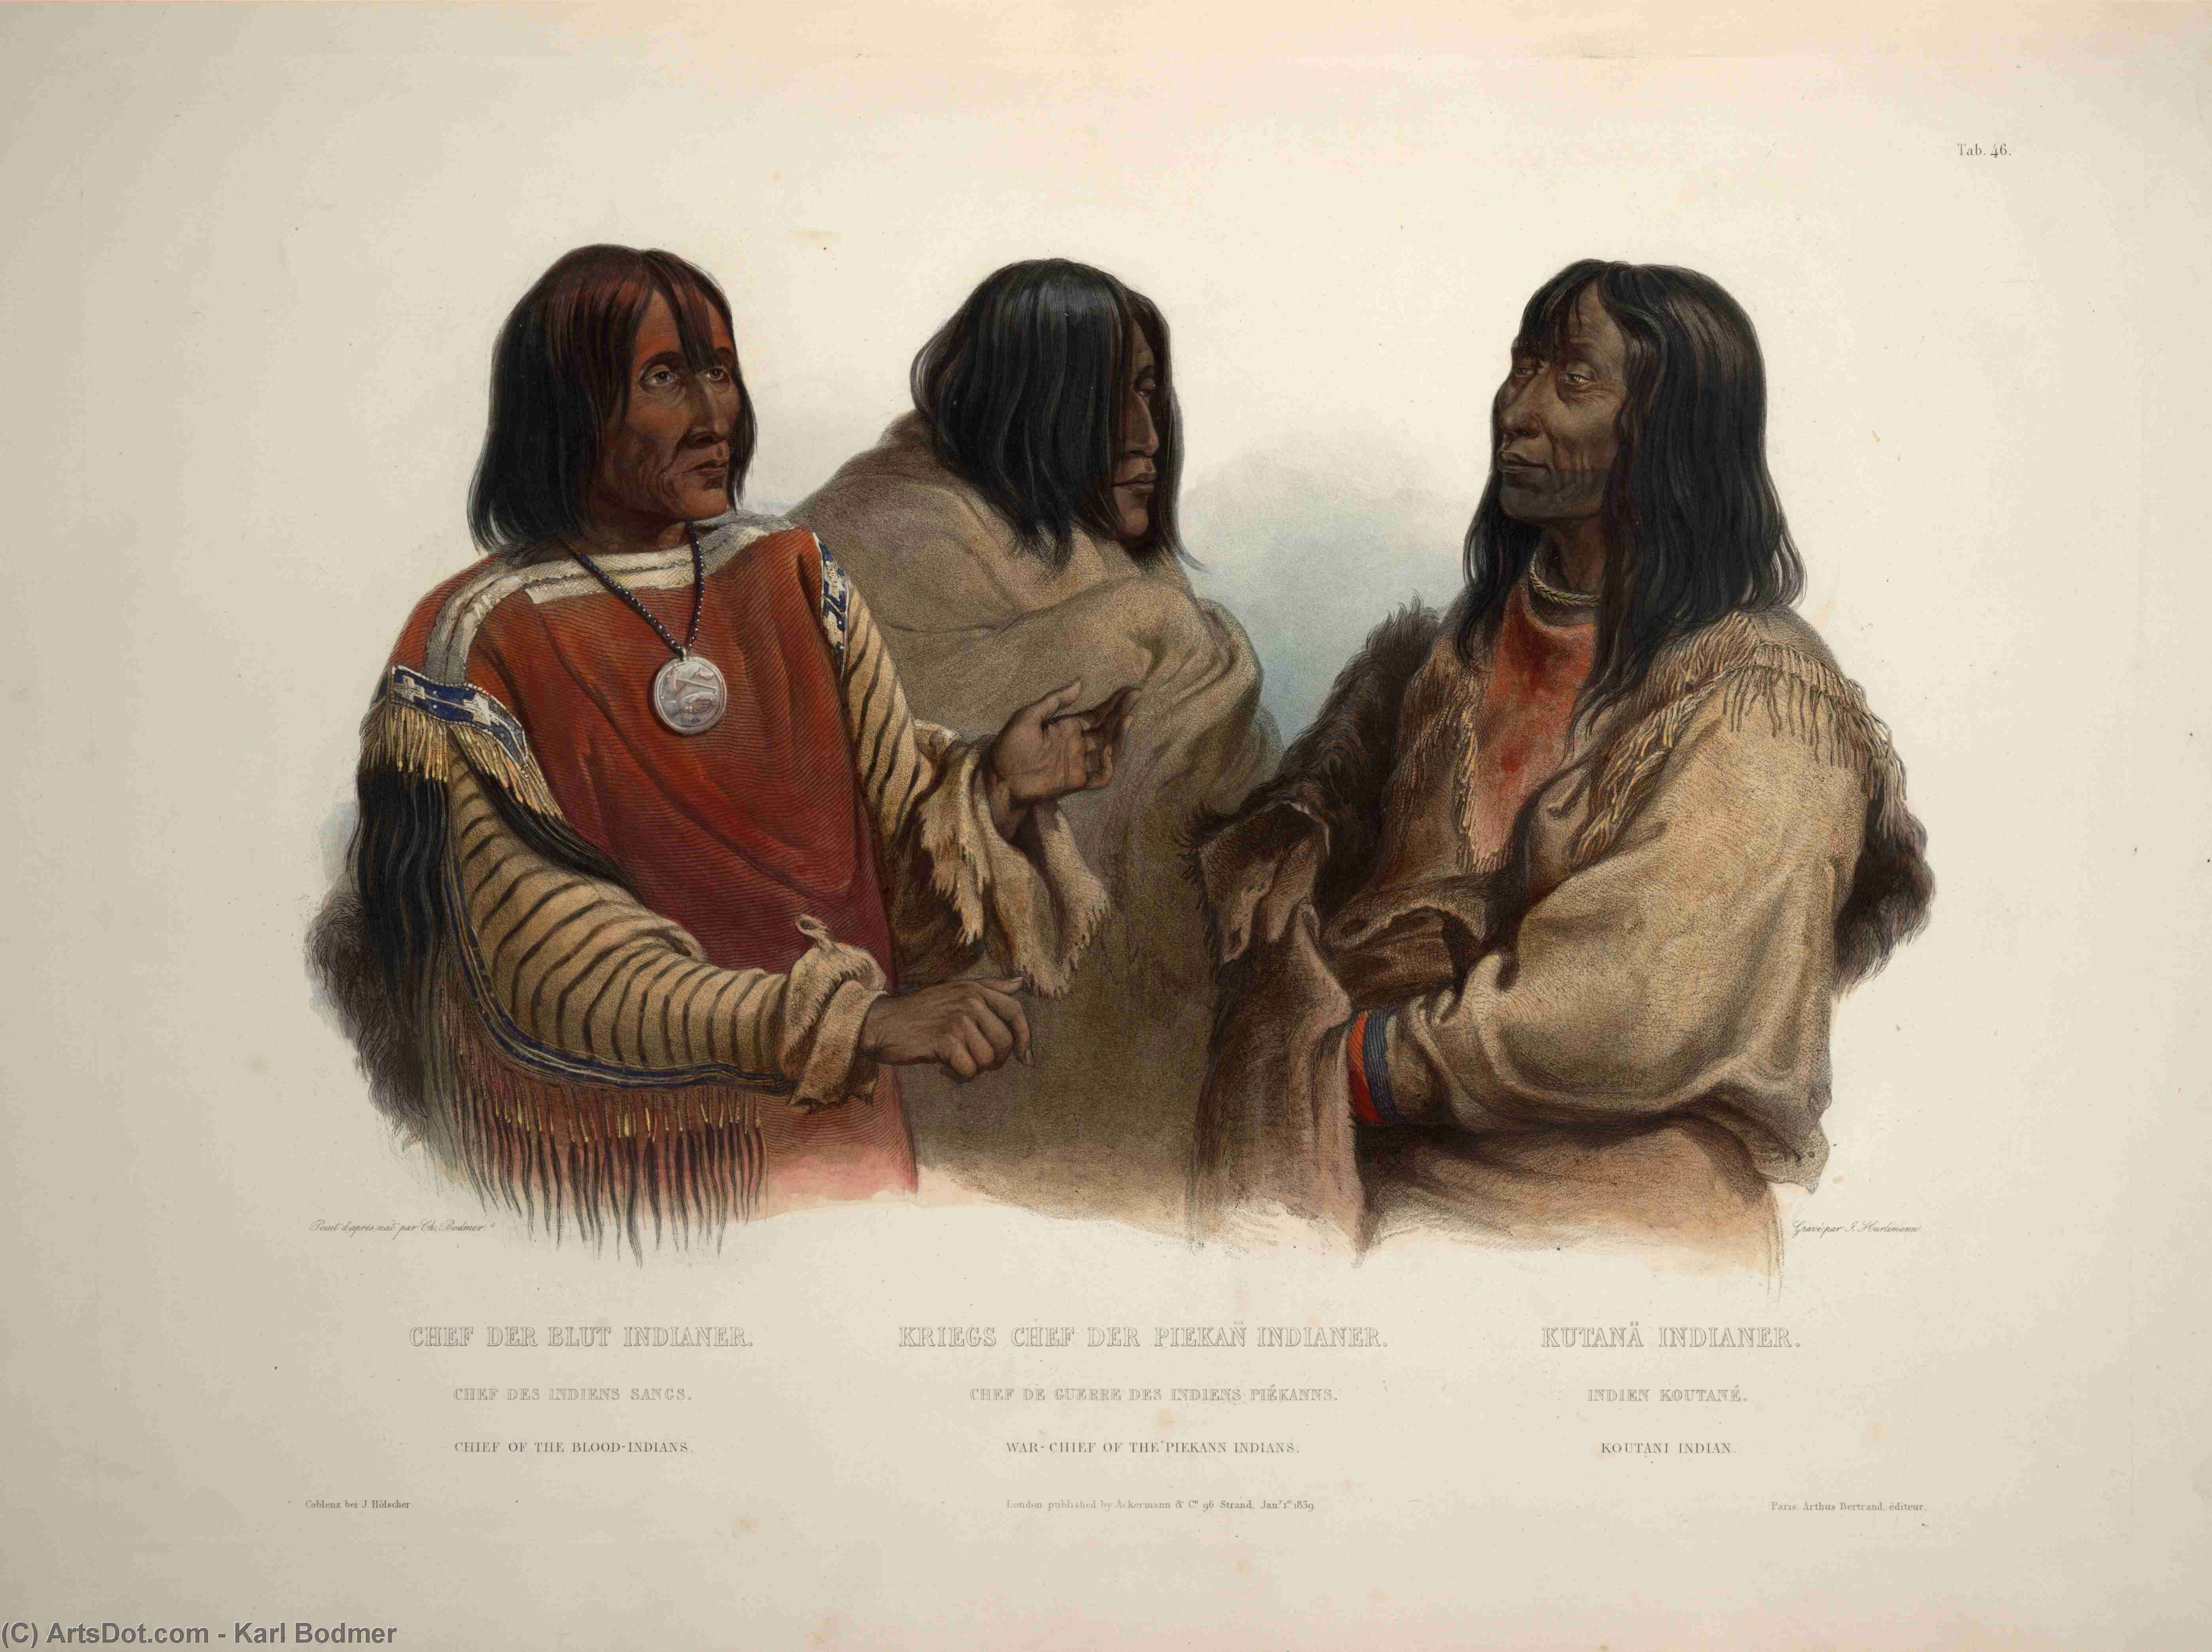 WikiOO.org - Encyclopedia of Fine Arts - Festés, Grafika Karl Bodmer - Chief Of The Blood Indians War Chief Of The Piekann Indians And Koutani Indian